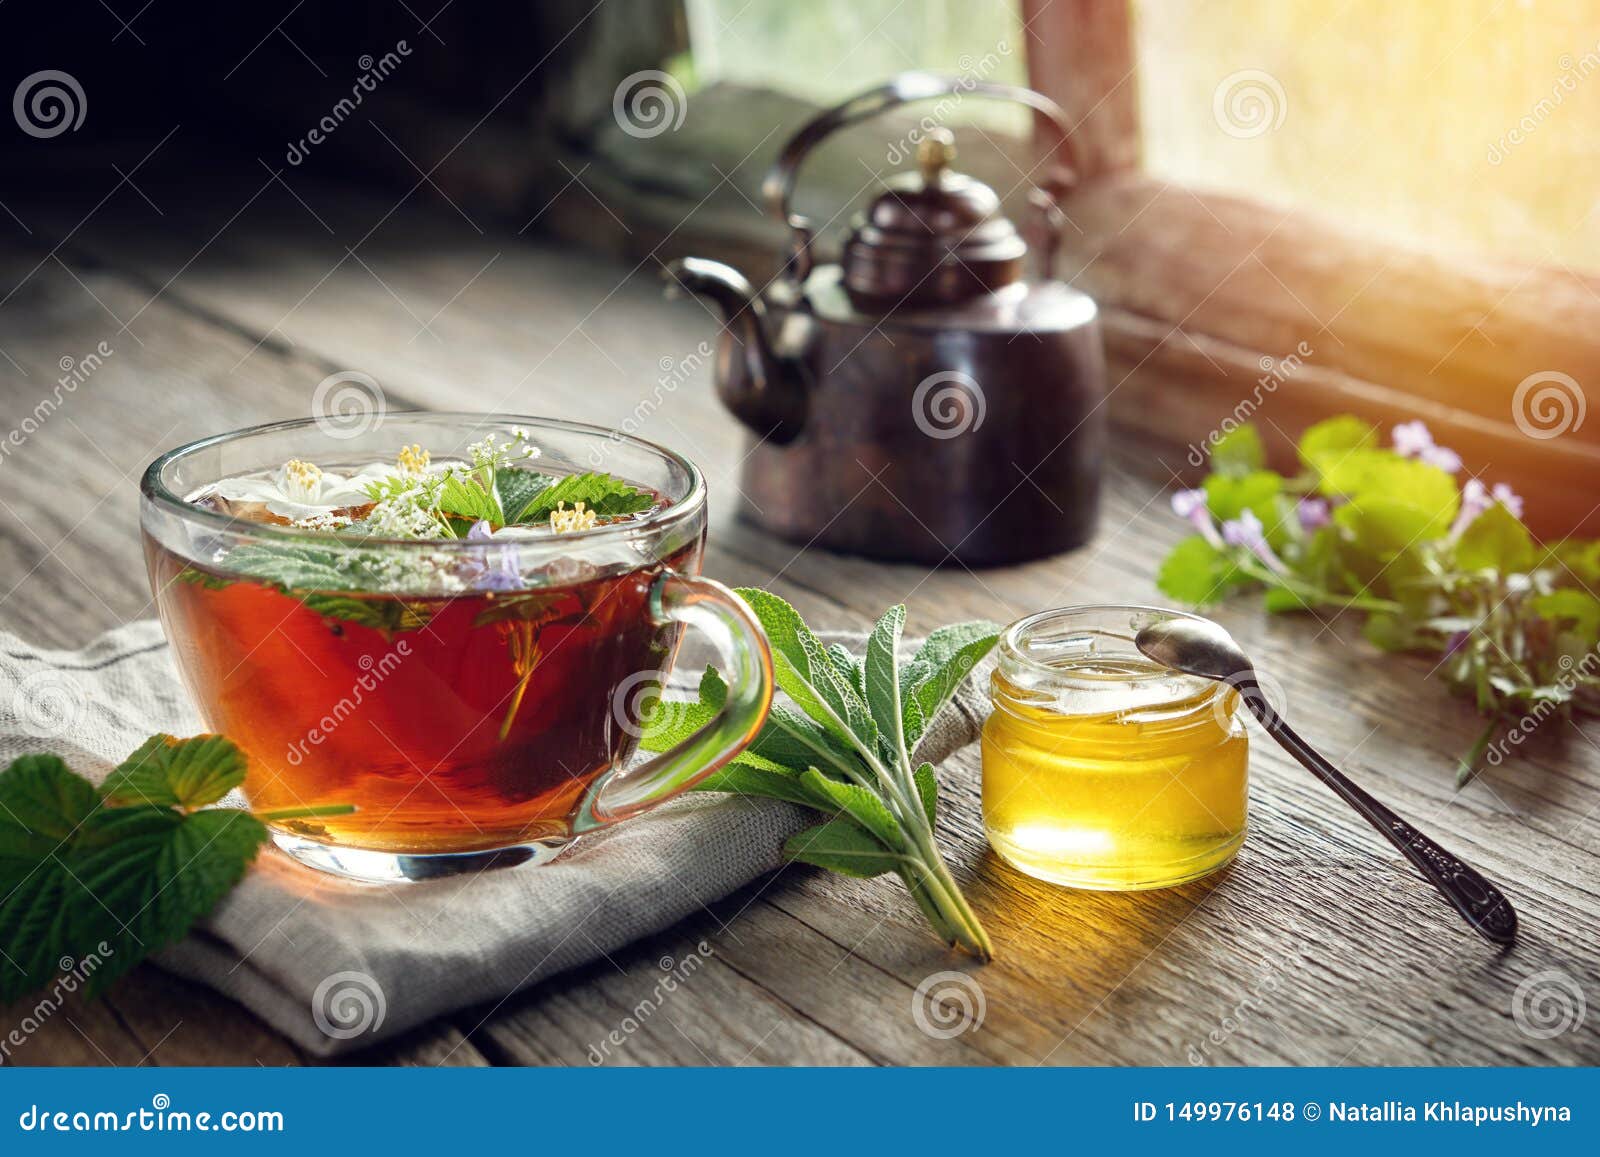 several medicinal plants and herbs on table, healthy herbal tea cup, honey jar and vintage copper tea kettle